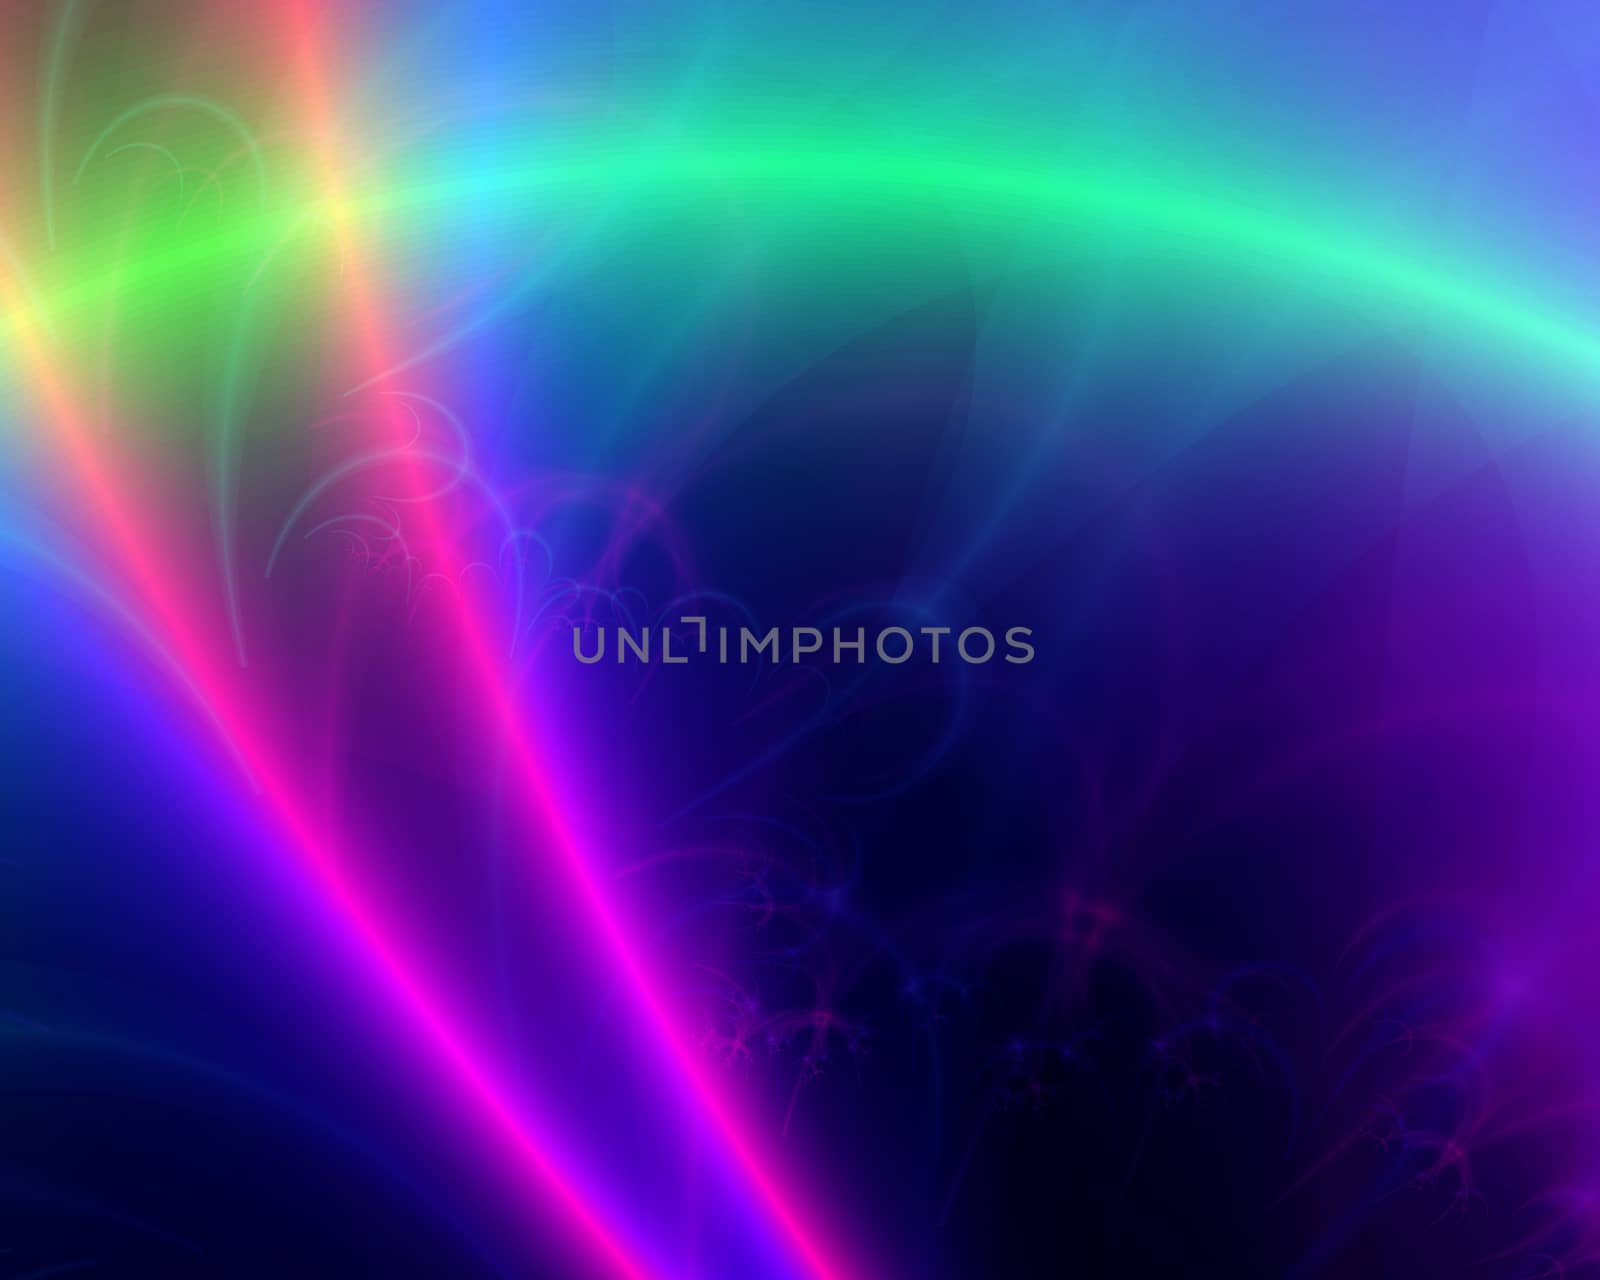 Abstract background. Colorful lights